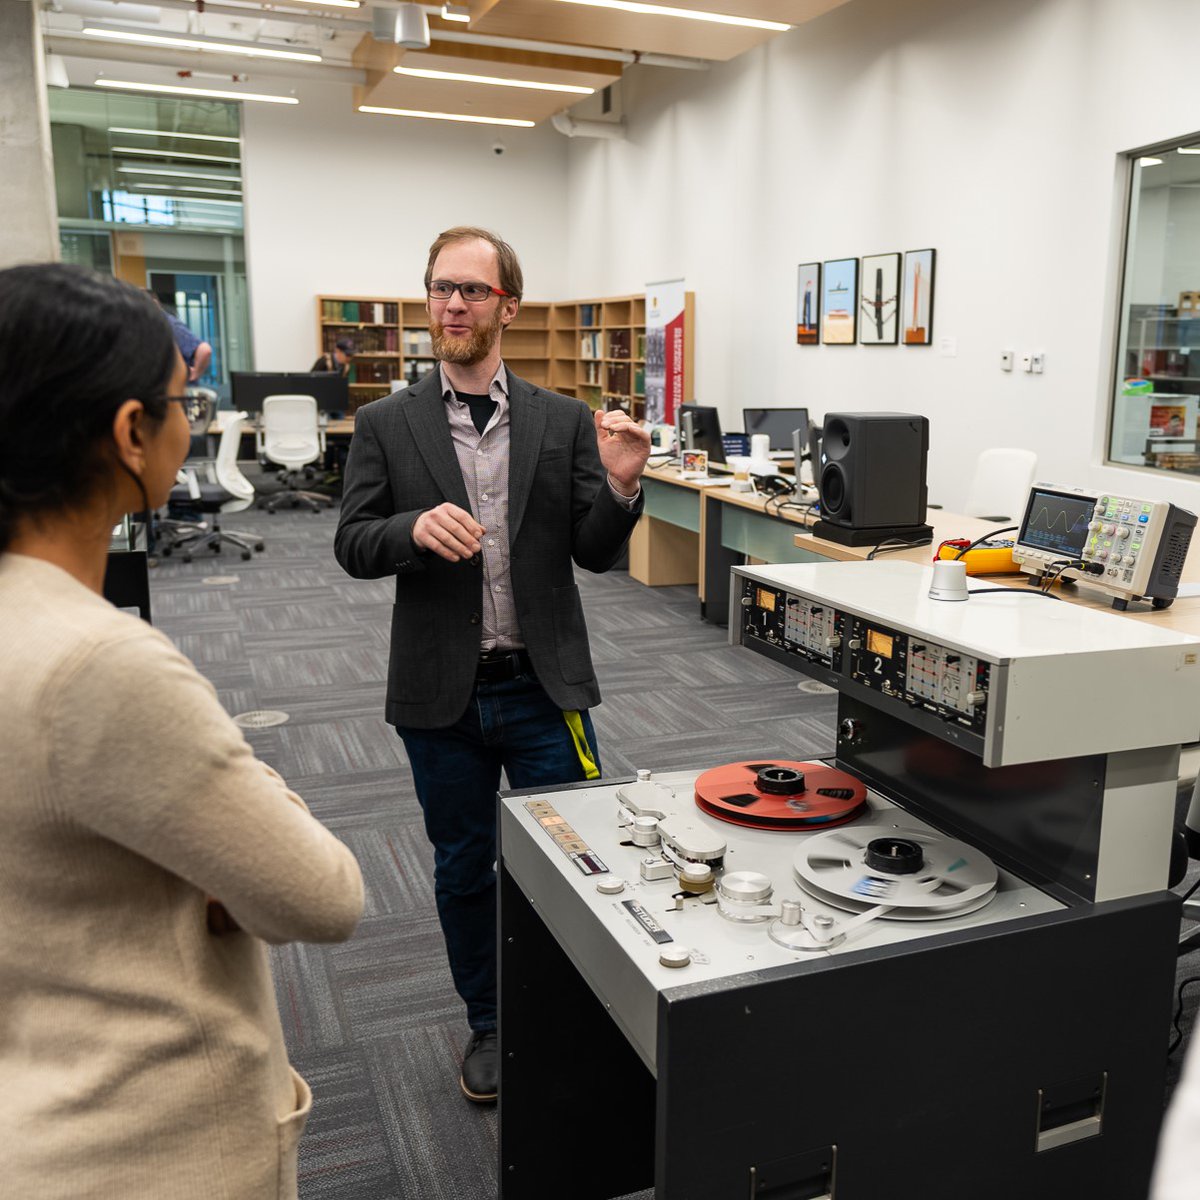 How do we preserve material on older legacy audio and video formats for future generations to enjoy? Nathan Chandler played some original master tapes from the EMI Music Canada collection and talked about digital preservation at #UCalgaryLibrary. ow.ly/q5Br50RsY46